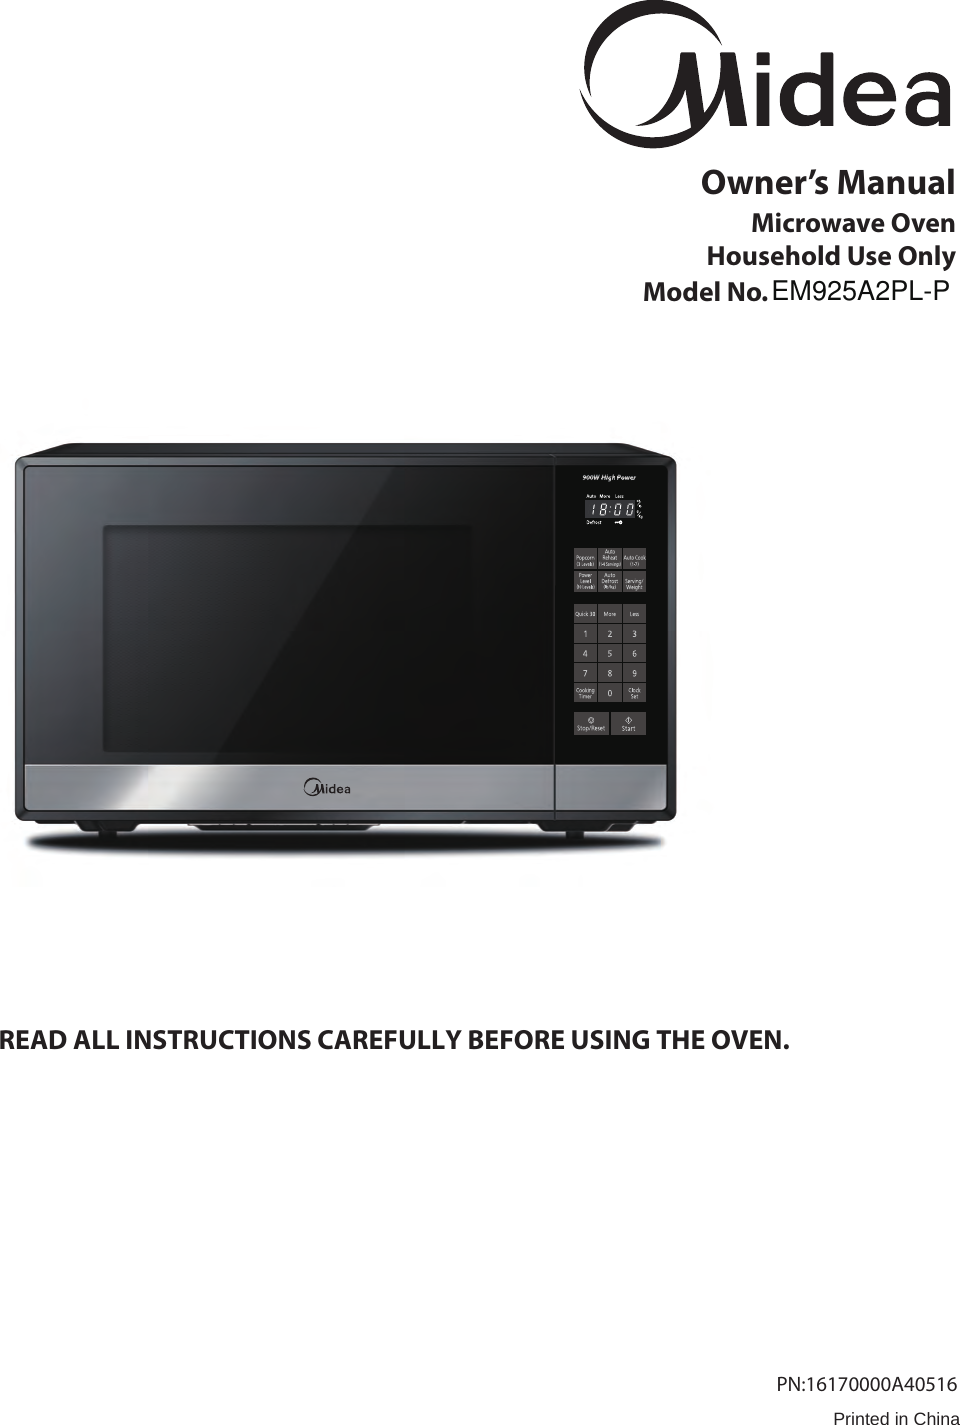 Owner’s ManualMicrowave OvenHousehold Use OnlyModel No. READ ALL INSTRUCTIONS CAREFULLY BEFORE USING THE OVEN.Printed in China        PN:16170000A40516EM925A2PL-P